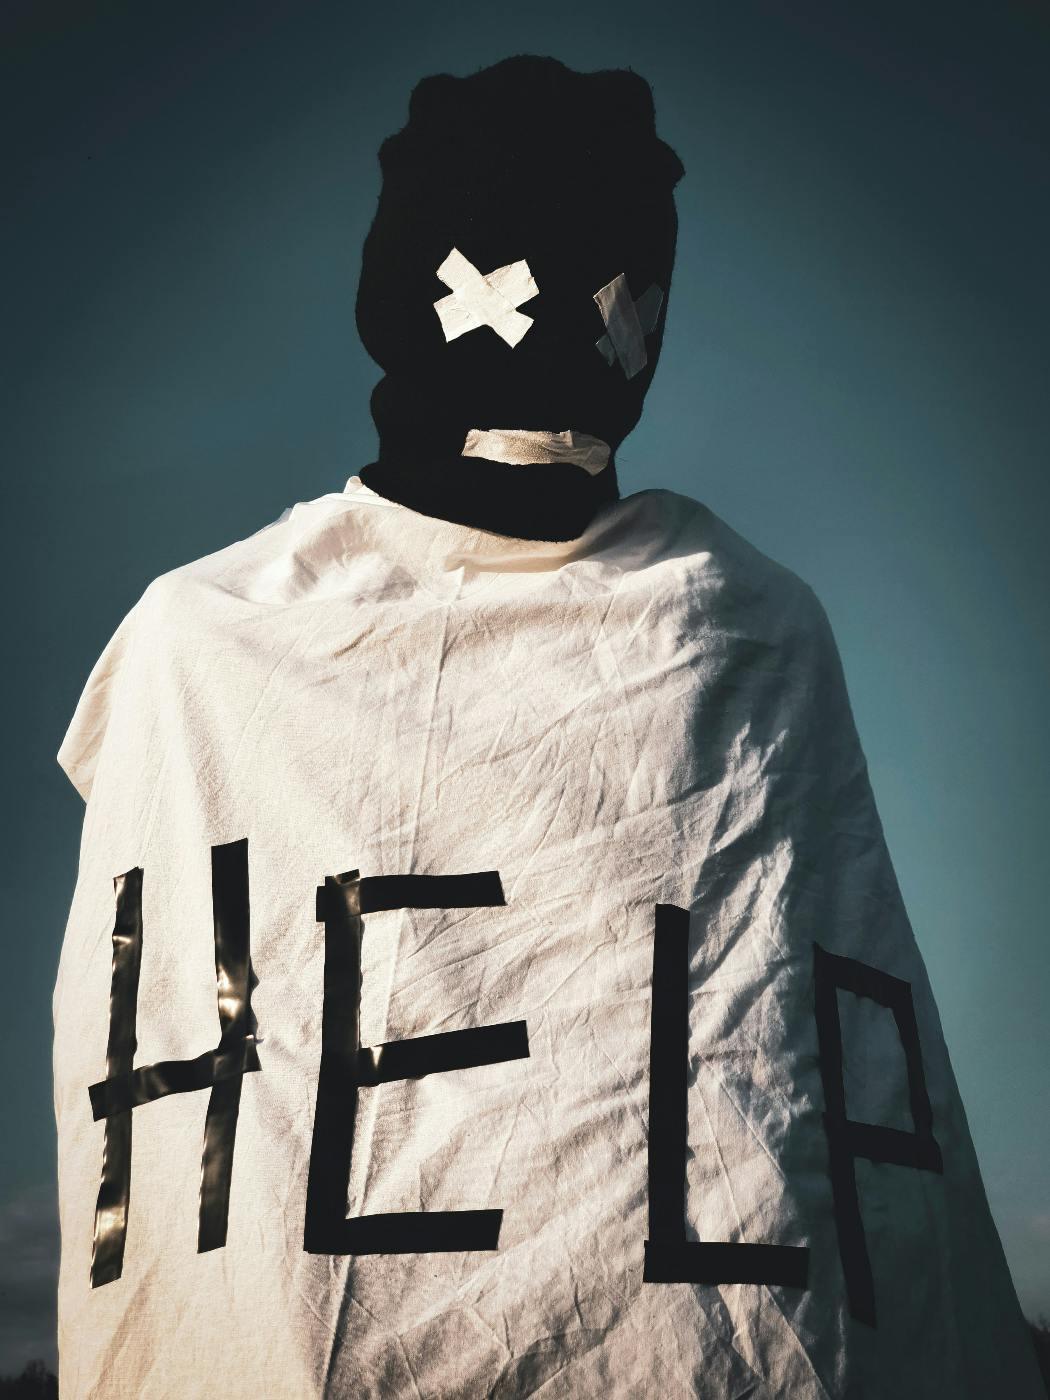 A person wearing a black ski mask and a sheet with the eye  and mouth holes taped shut and Help written on the sheet